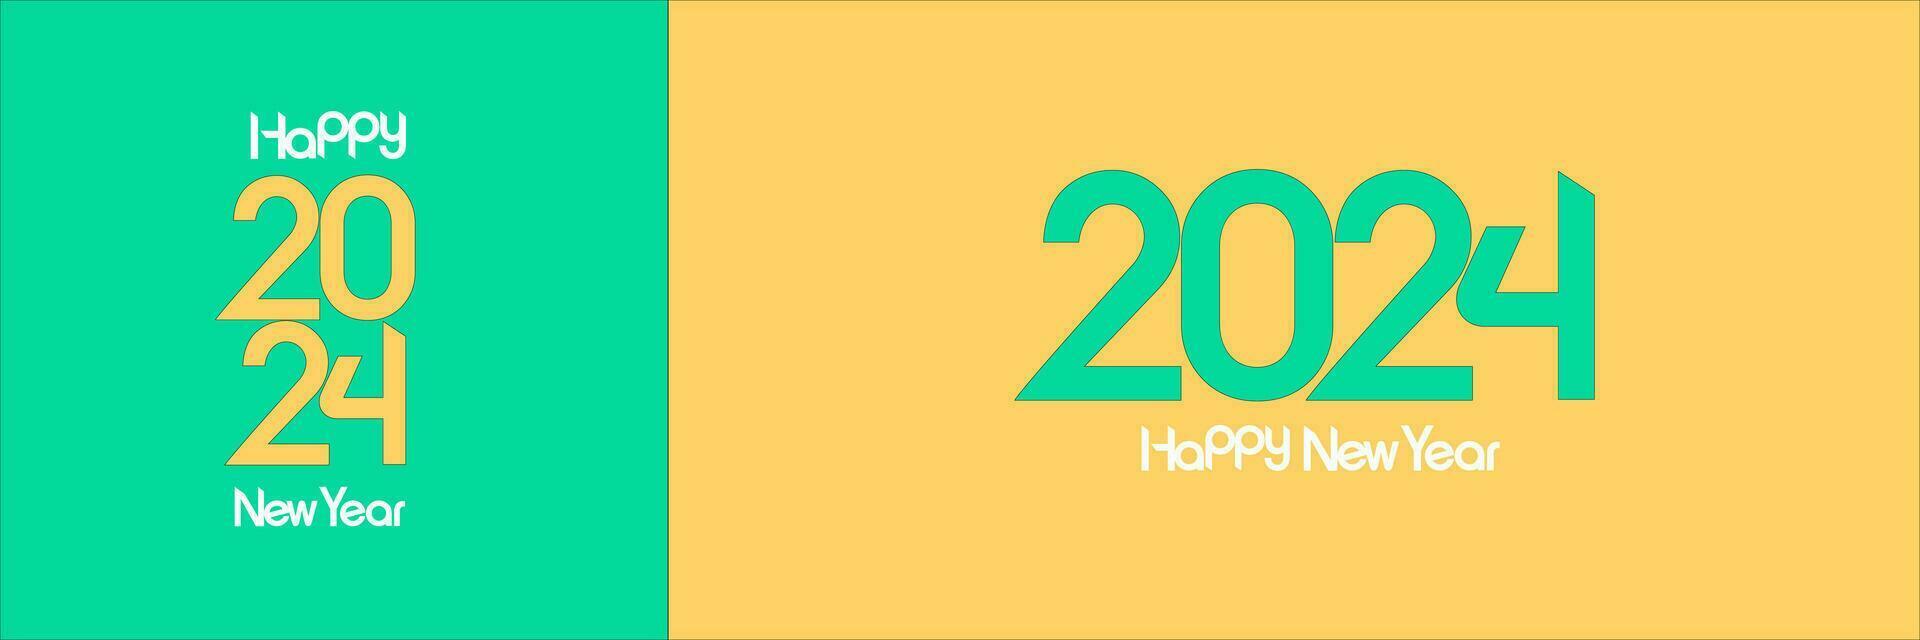 Happy New Year 2024. festive realistic decoration. Celebrate 2024 party, With thick and modern fonts. Colorful design. Vector Premium Background for Banners, Posters or Calendar.